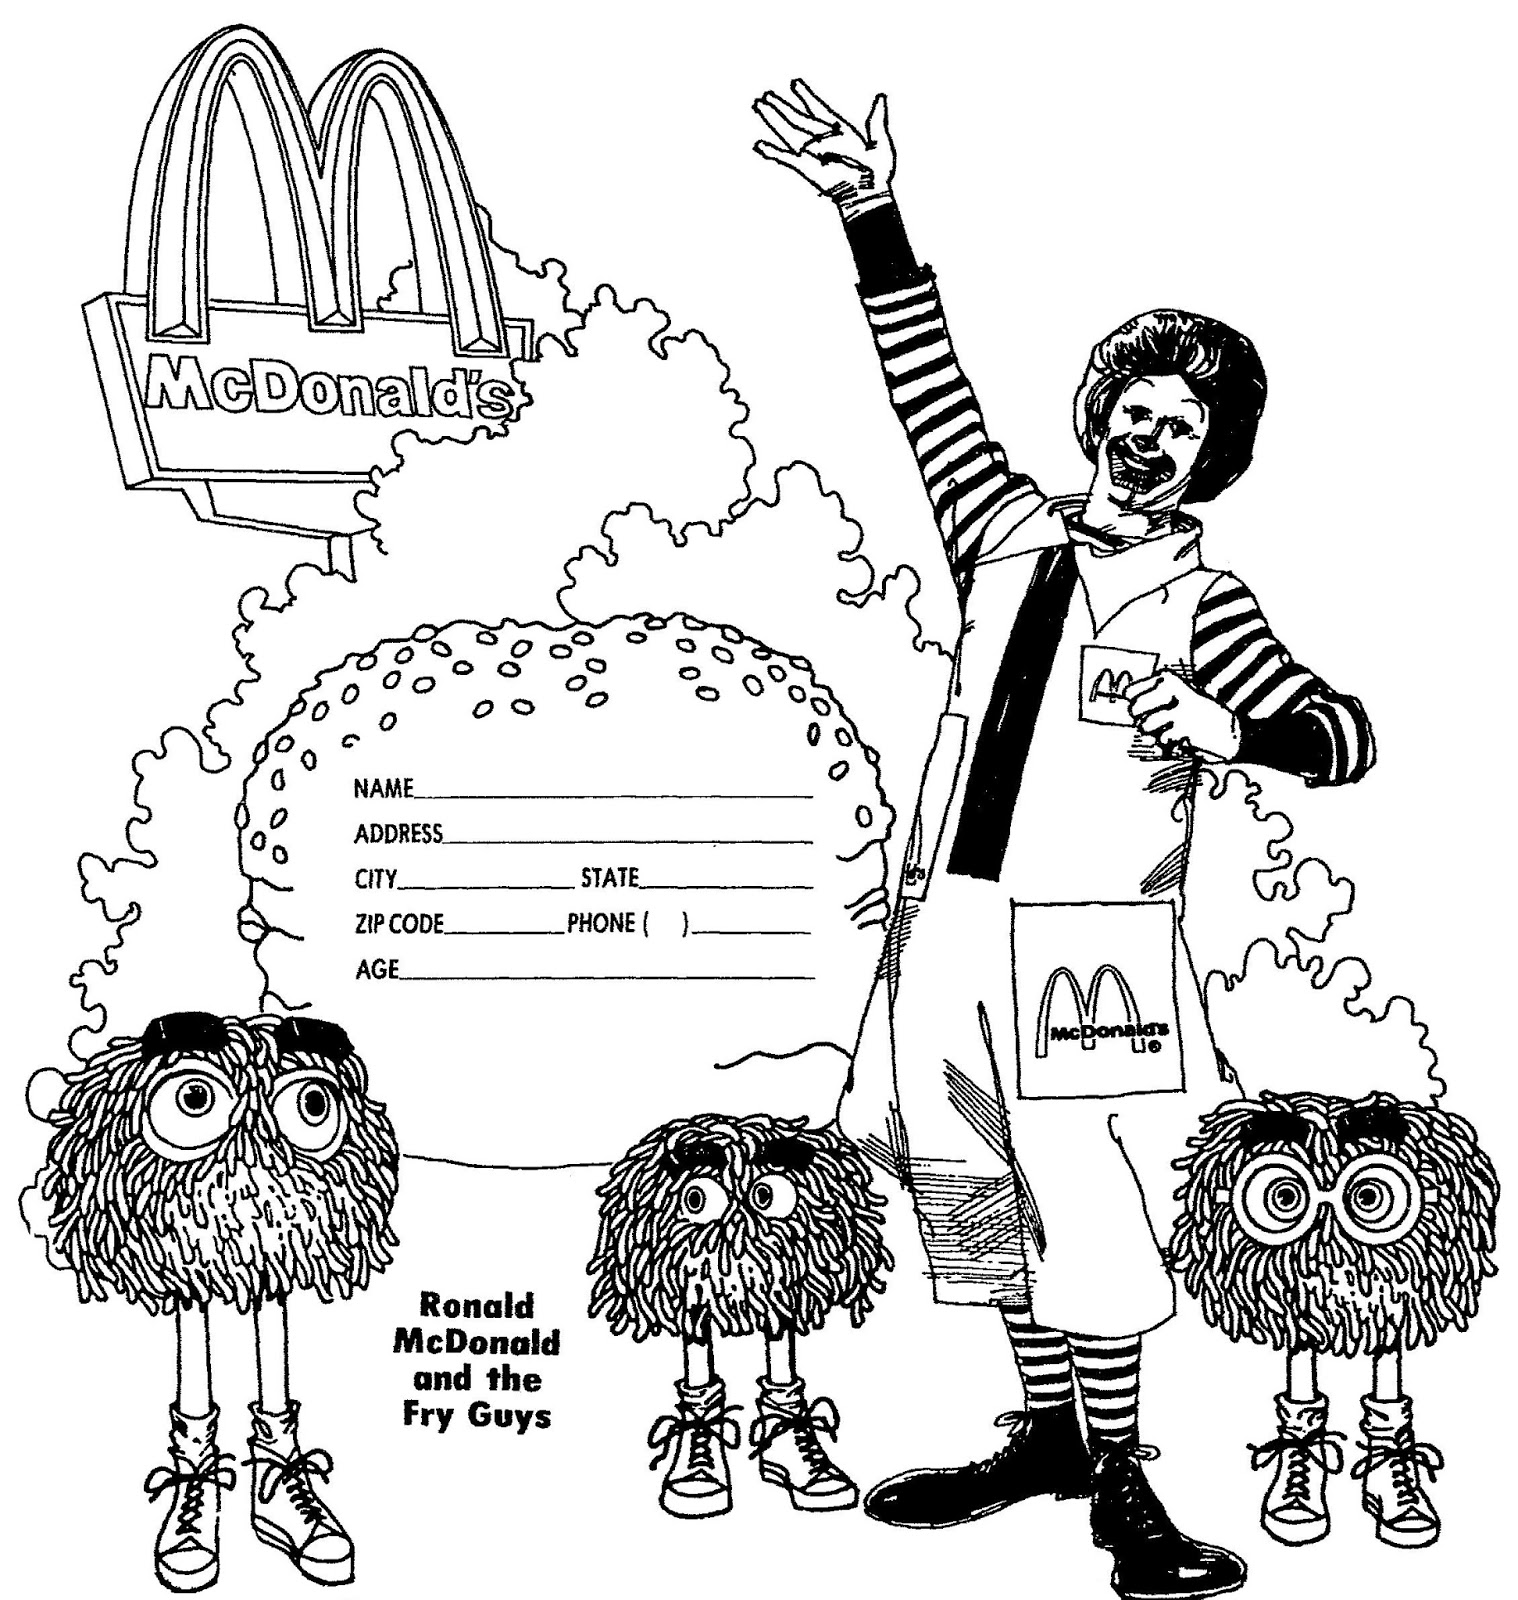 Mostly Paper Dolls Too!: Ronald McDonald and the Fry Guys